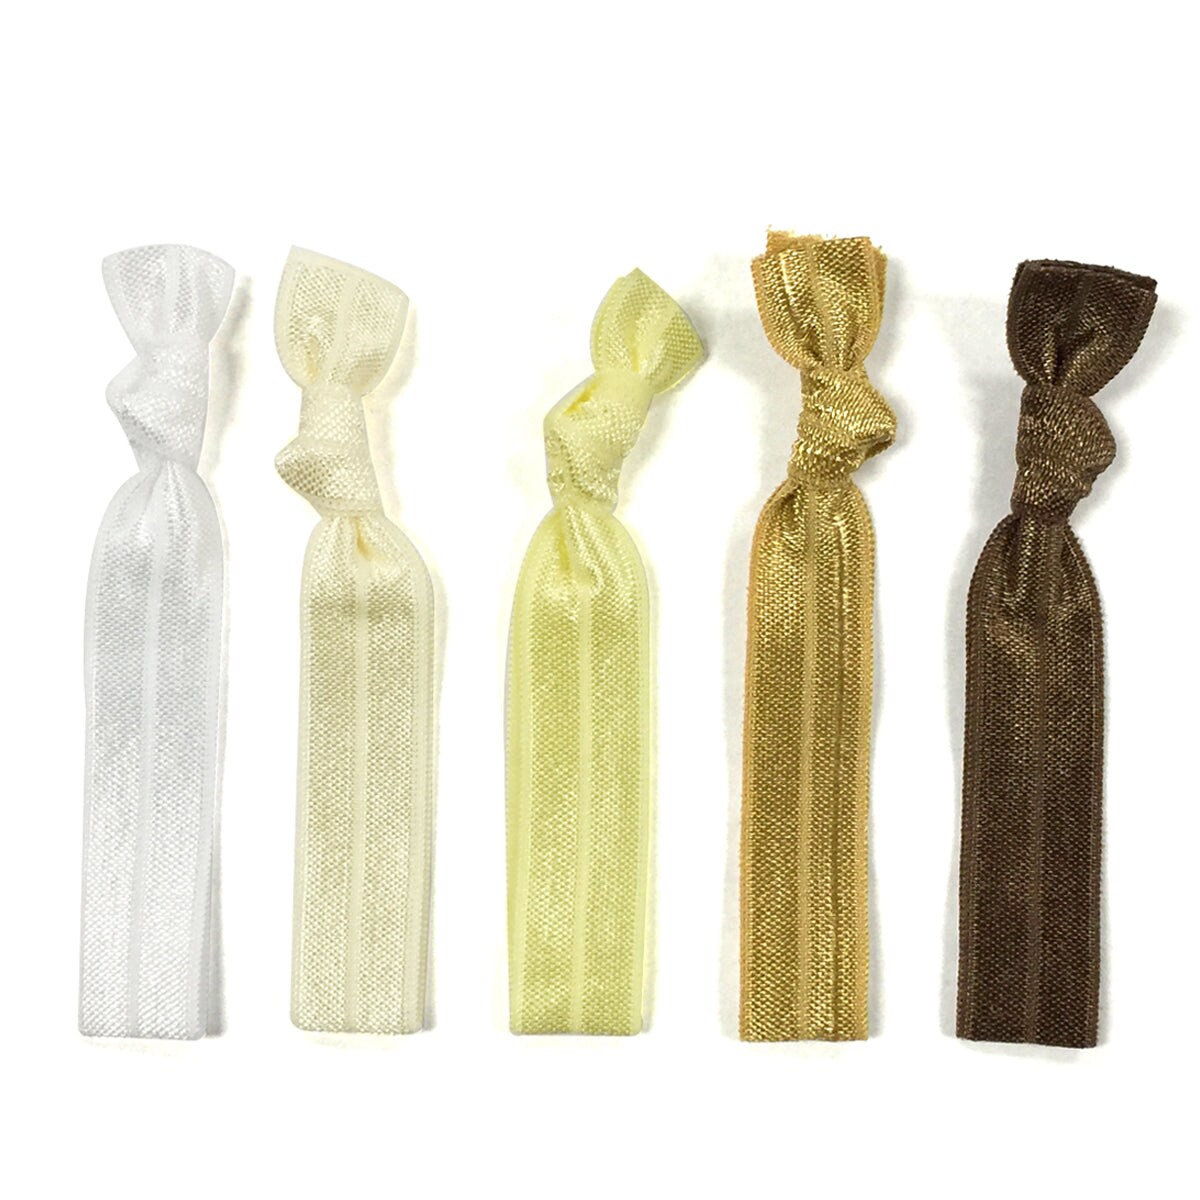 Wrapables Colorful Hair Ties Ponytail Holders (Set of 5), Neutral